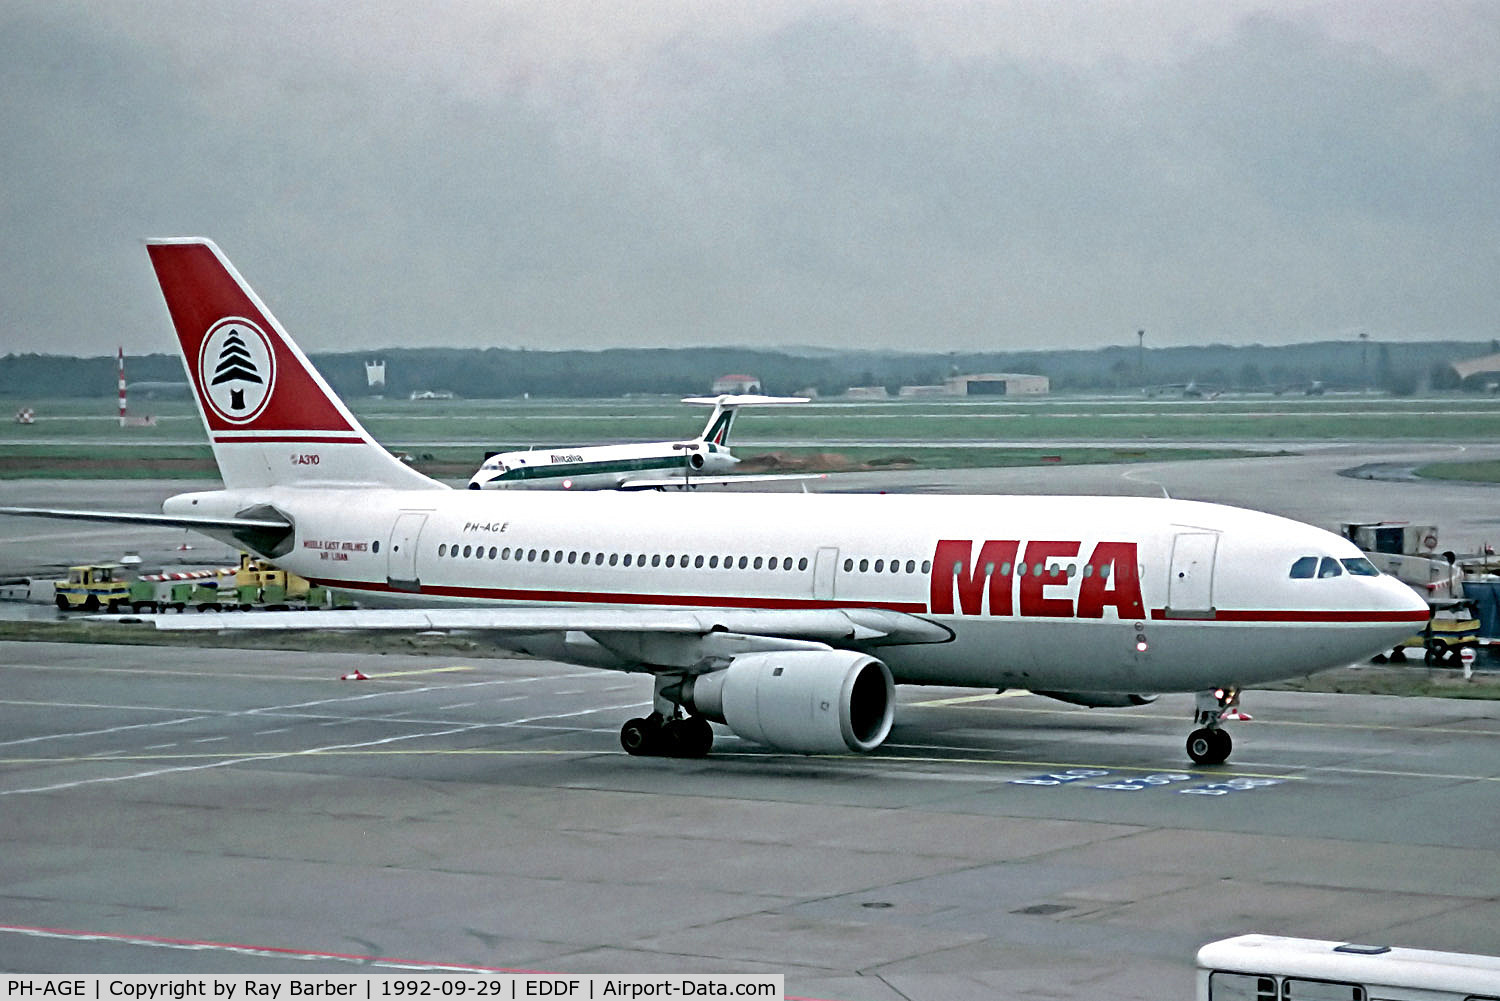 PH-AGE, 1984 Airbus A310-203 C/N 283, PH-AGE   Airbus A310-203 [283] (MEA-Middle East Airlines) Frankfurt Int'l 29/09/1992